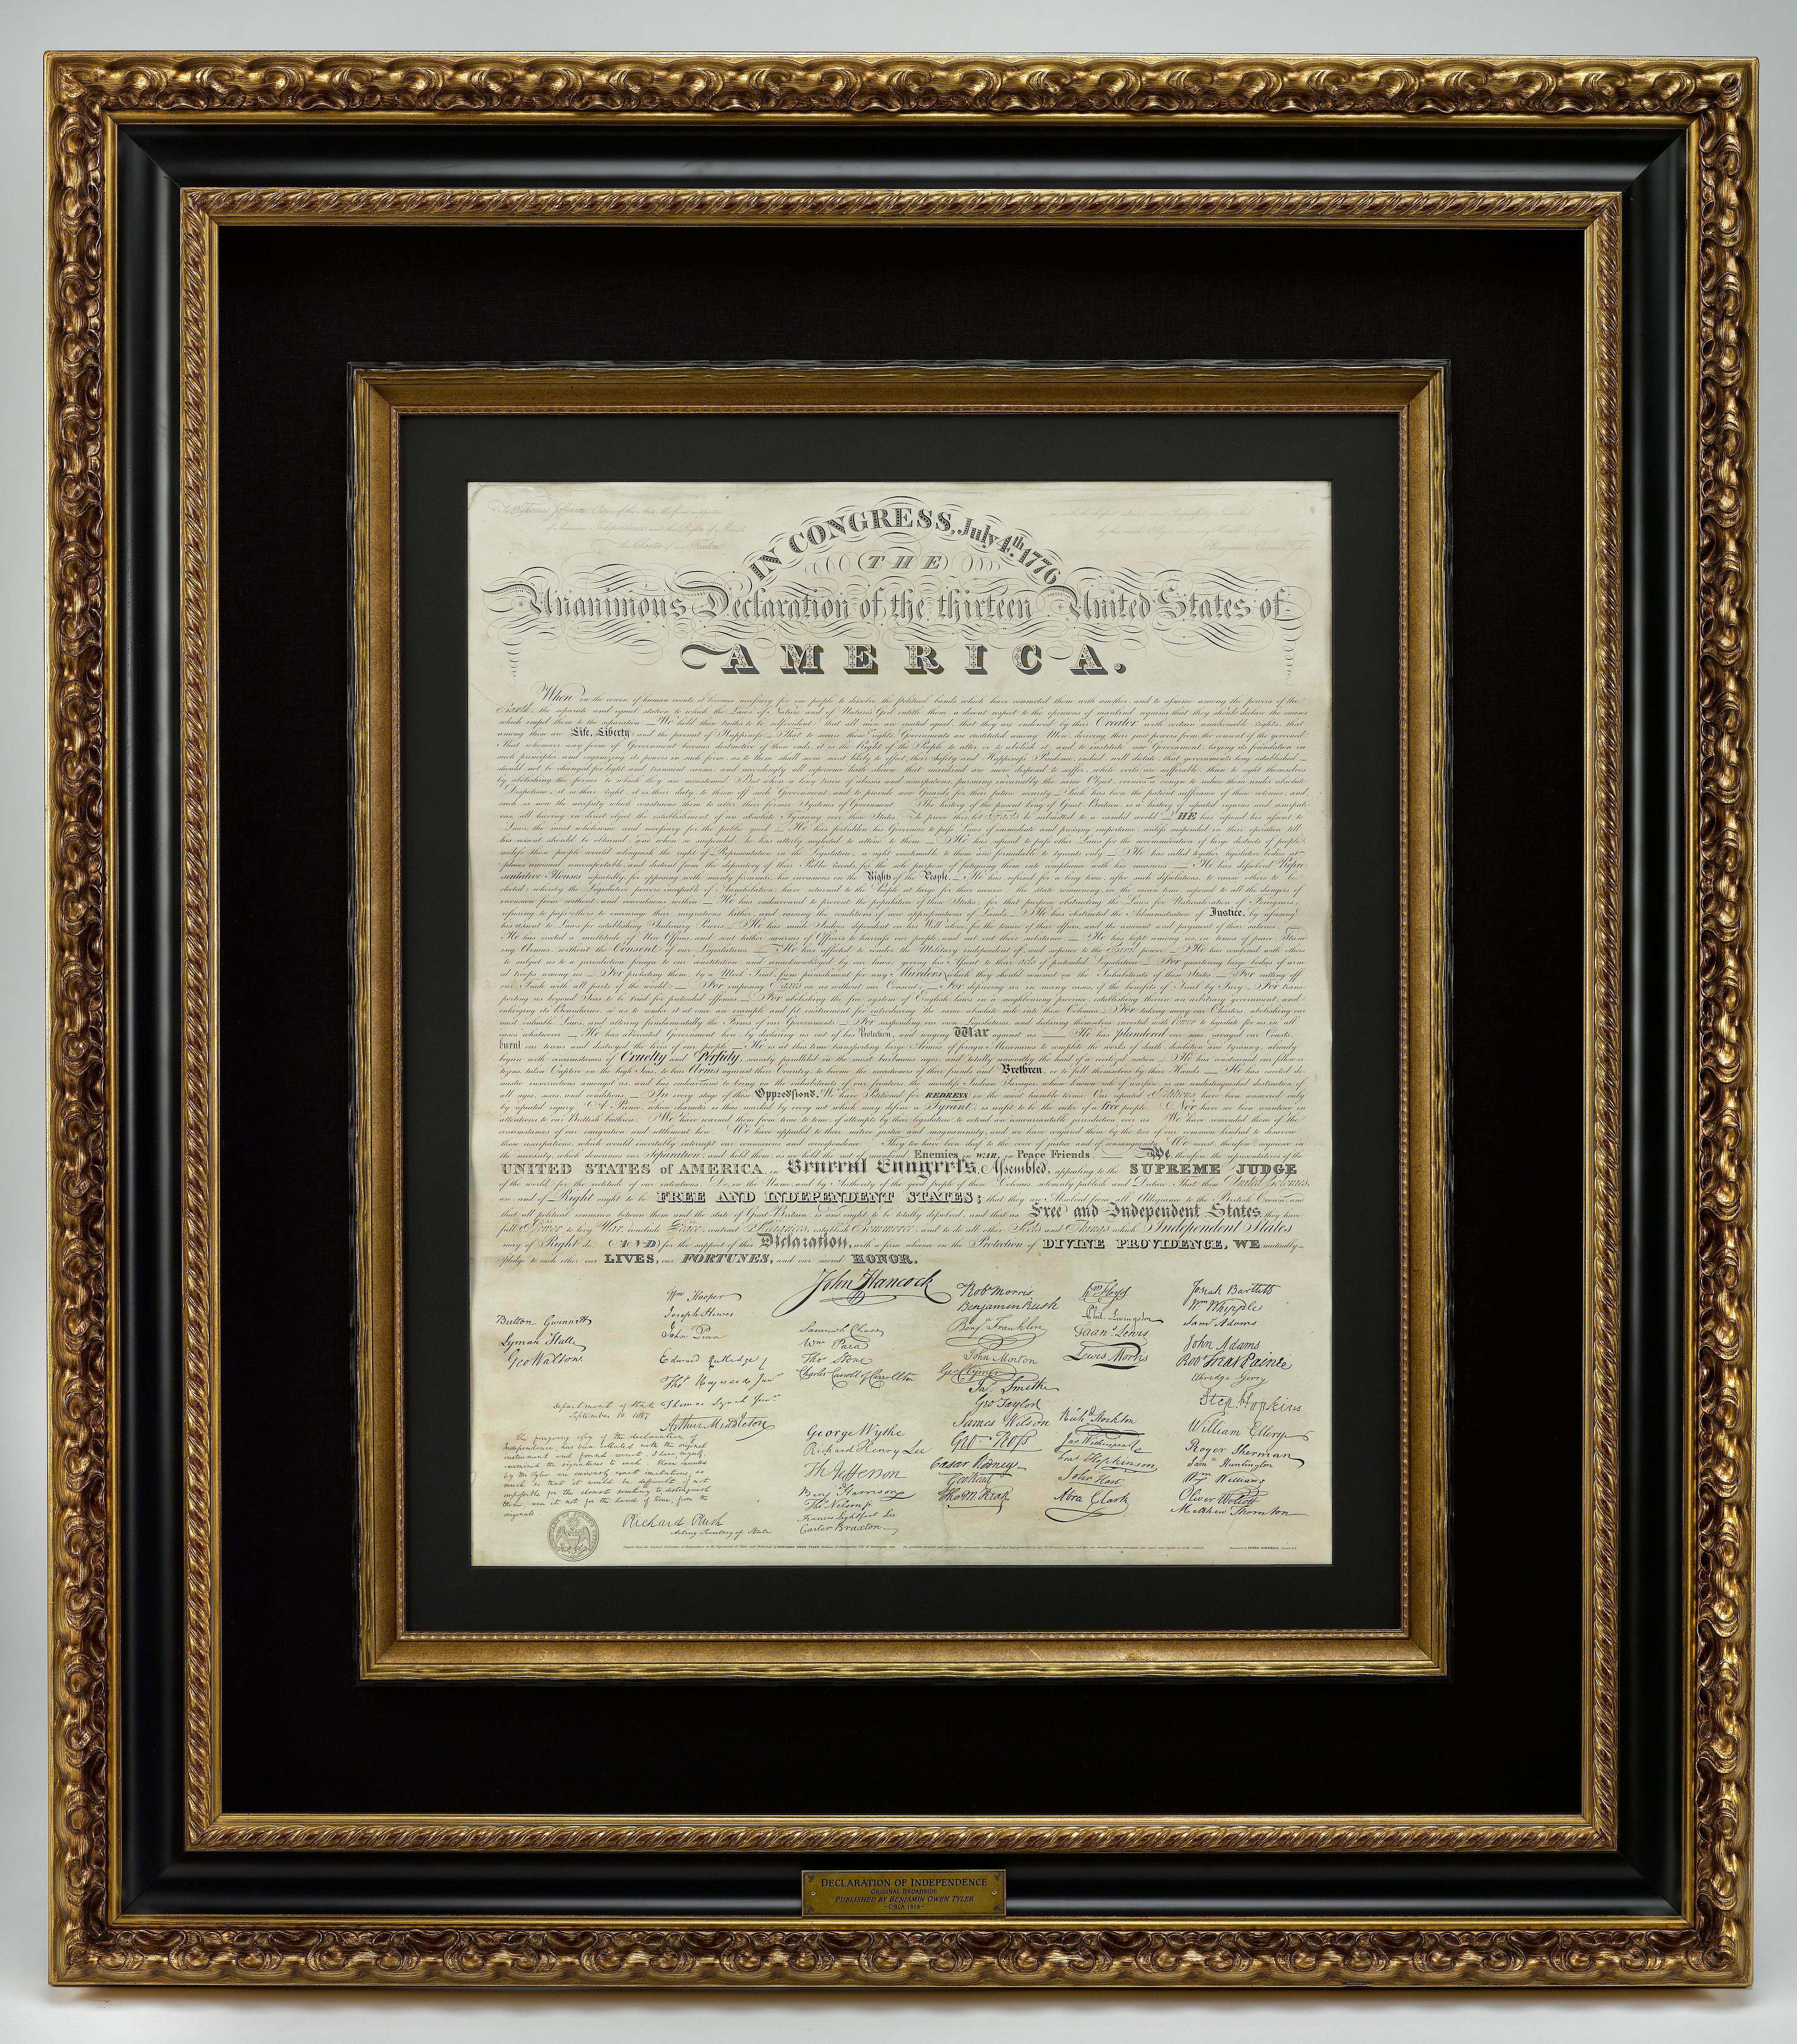 This is a stunning 1818 engraving of the Declaration of Independence, the first engraved broadside of our nation’s founding document. The year 1815 saw the conclusion of the United States’ second war with Britain, the War of 1812, and our American